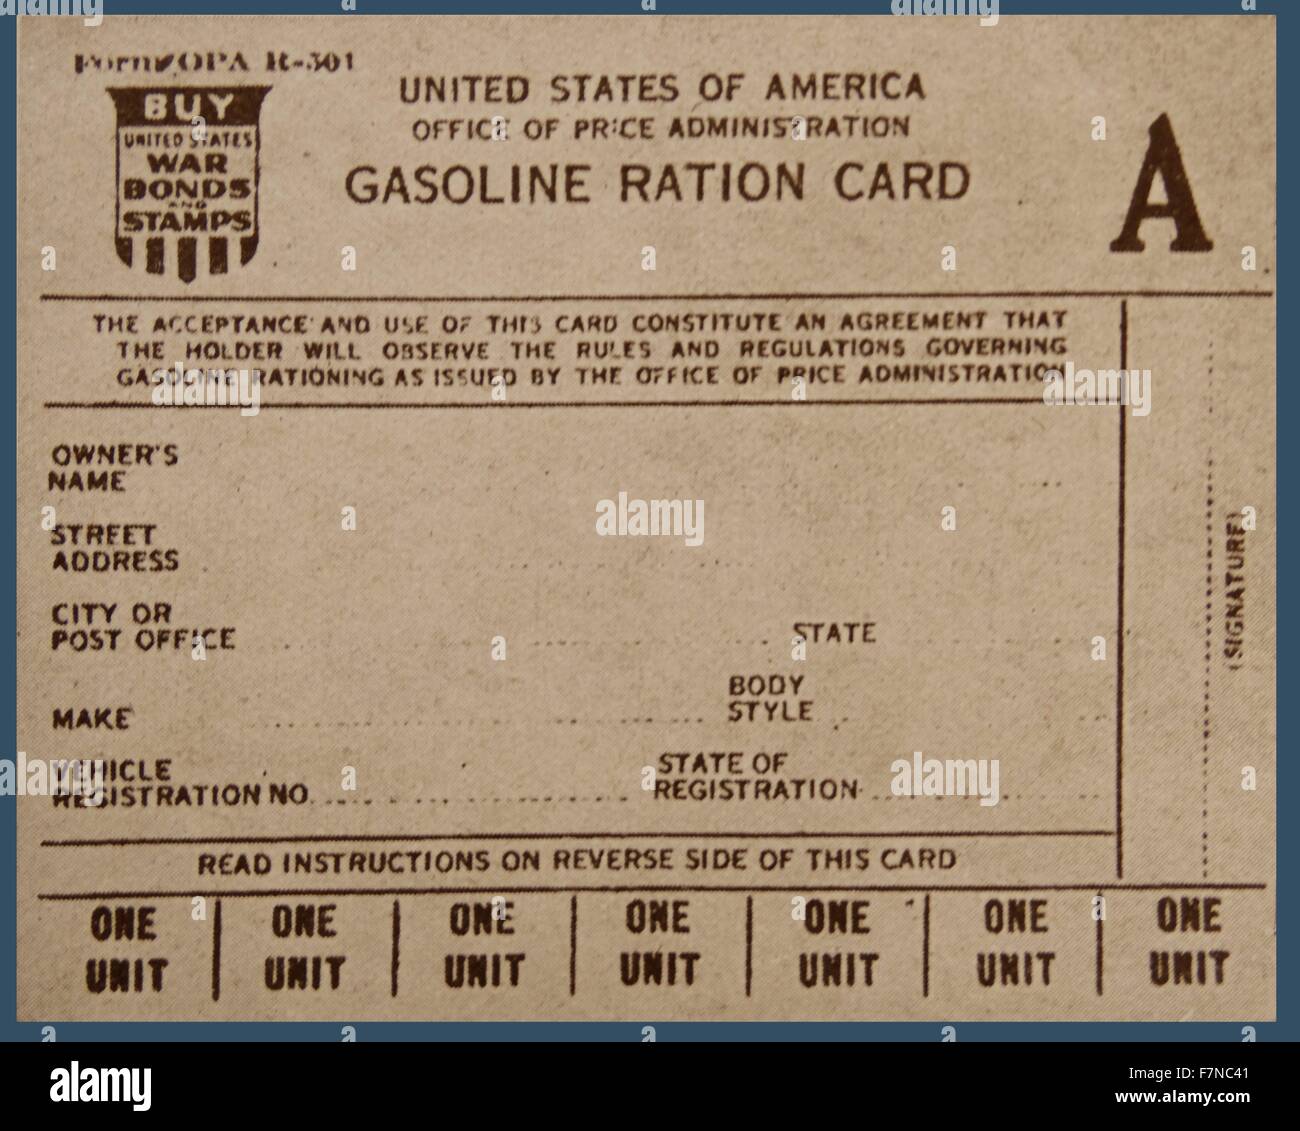 The United States of America issues Gasoline Ration Cards.  You were only allowed to buy a small amount, even if you could afford more.  Rationing was the only way to make sure everyone got their fair share. Stock Photo